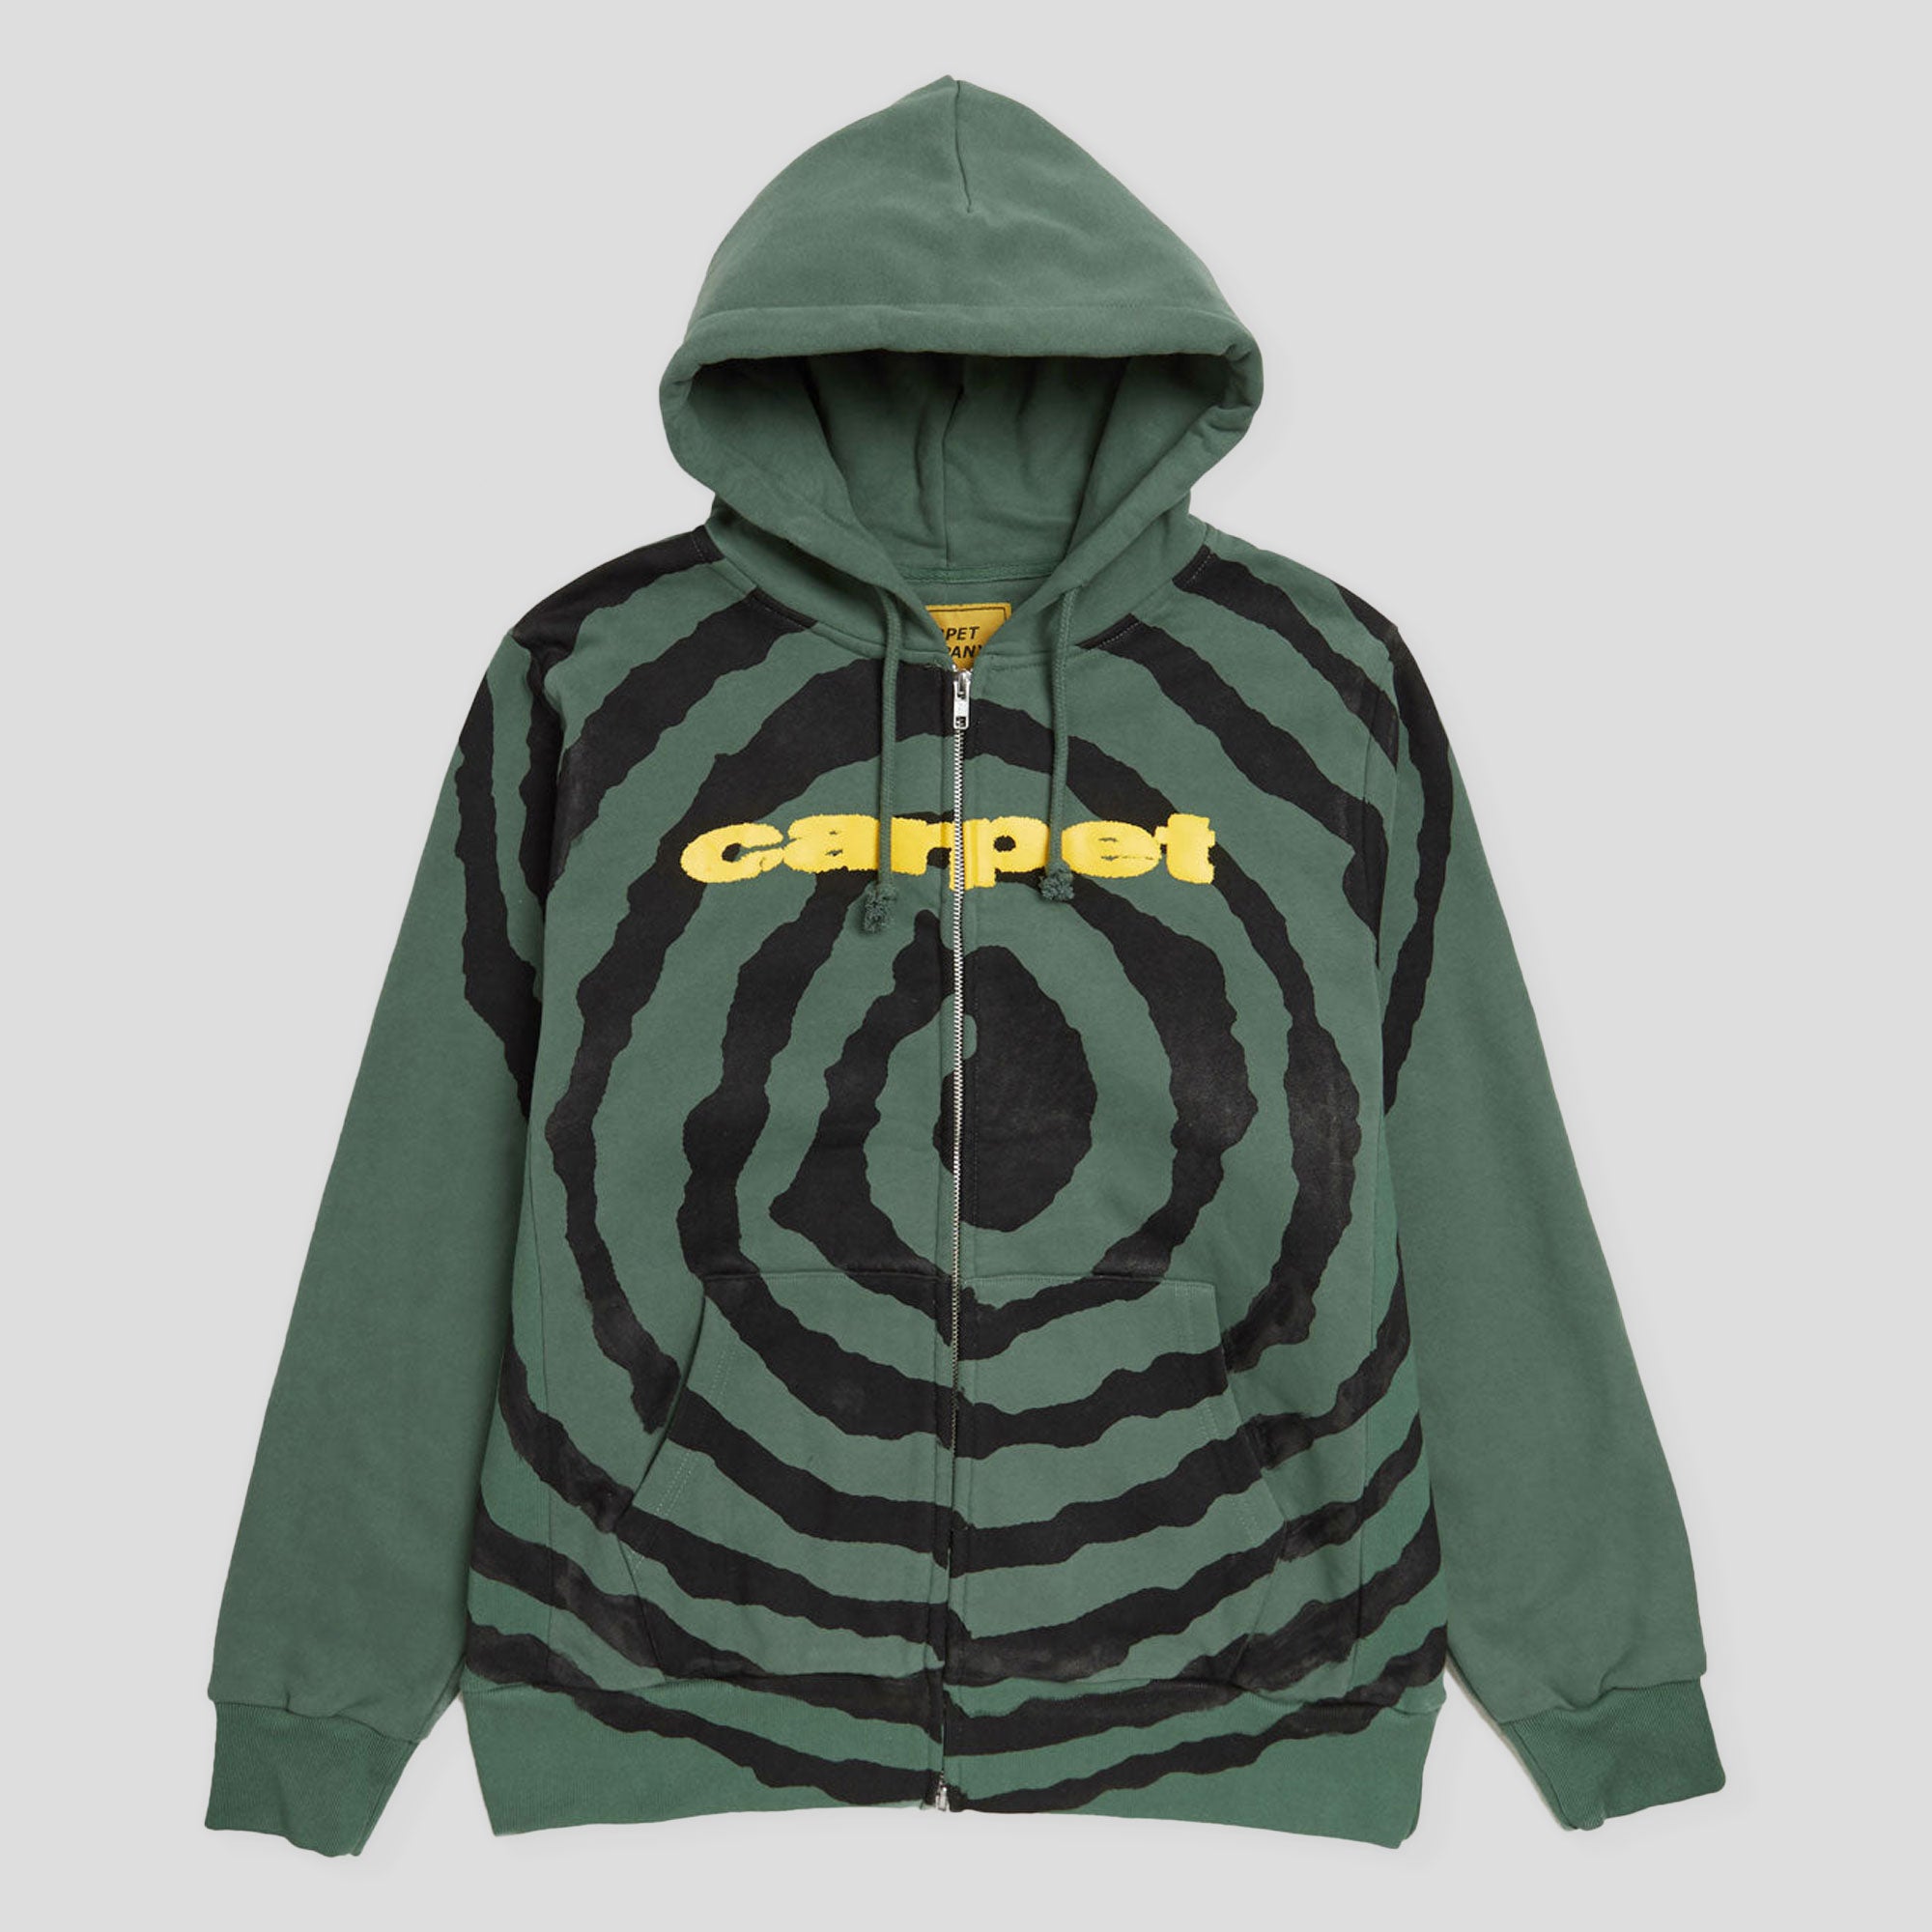 Carpet Company Spiral Zip-up Hoodie - Forest Green